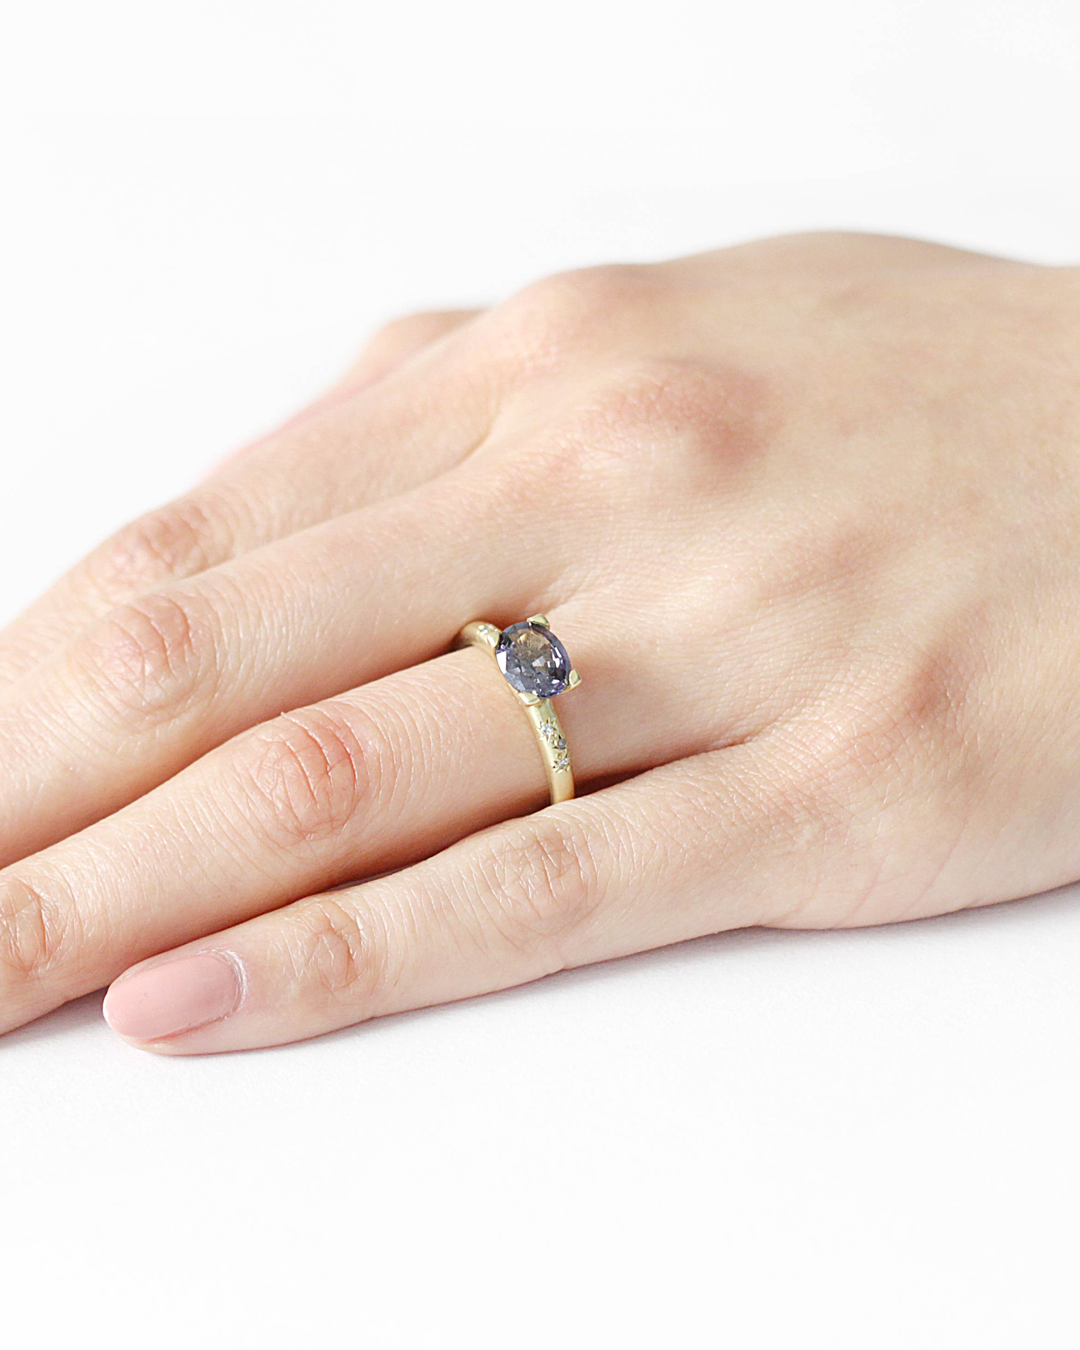 PM 6 Star / Purple Spinel By fitzgerald jewelry